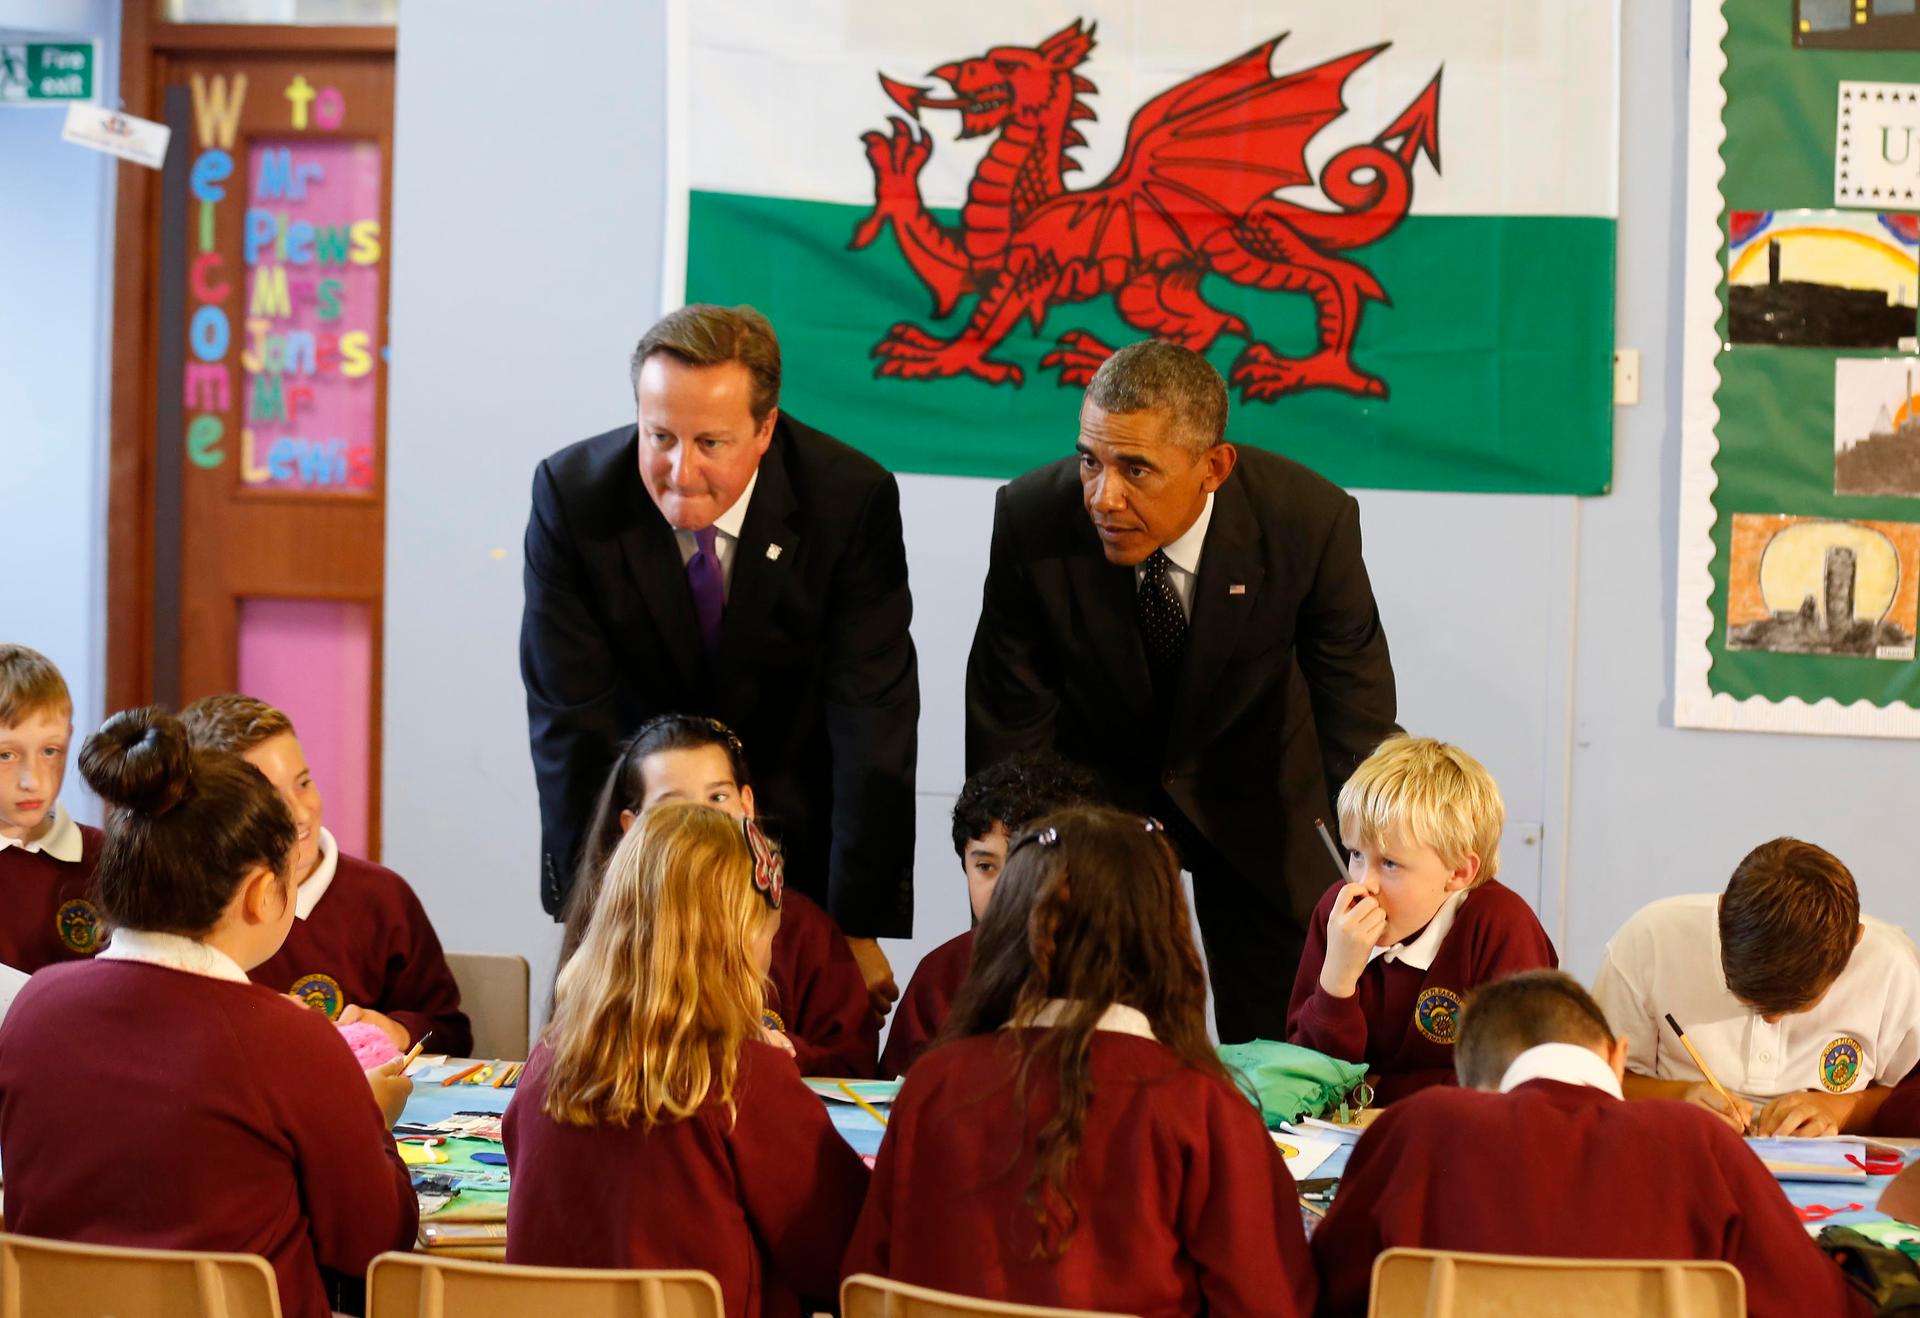 Barack Obama joins British Prime Minister David Cameron on a visit to a school prior to the NATO summit in Wales on Thursday. Western leaders are looking for strategies to deal with threats from Russia and the Islamic State. 